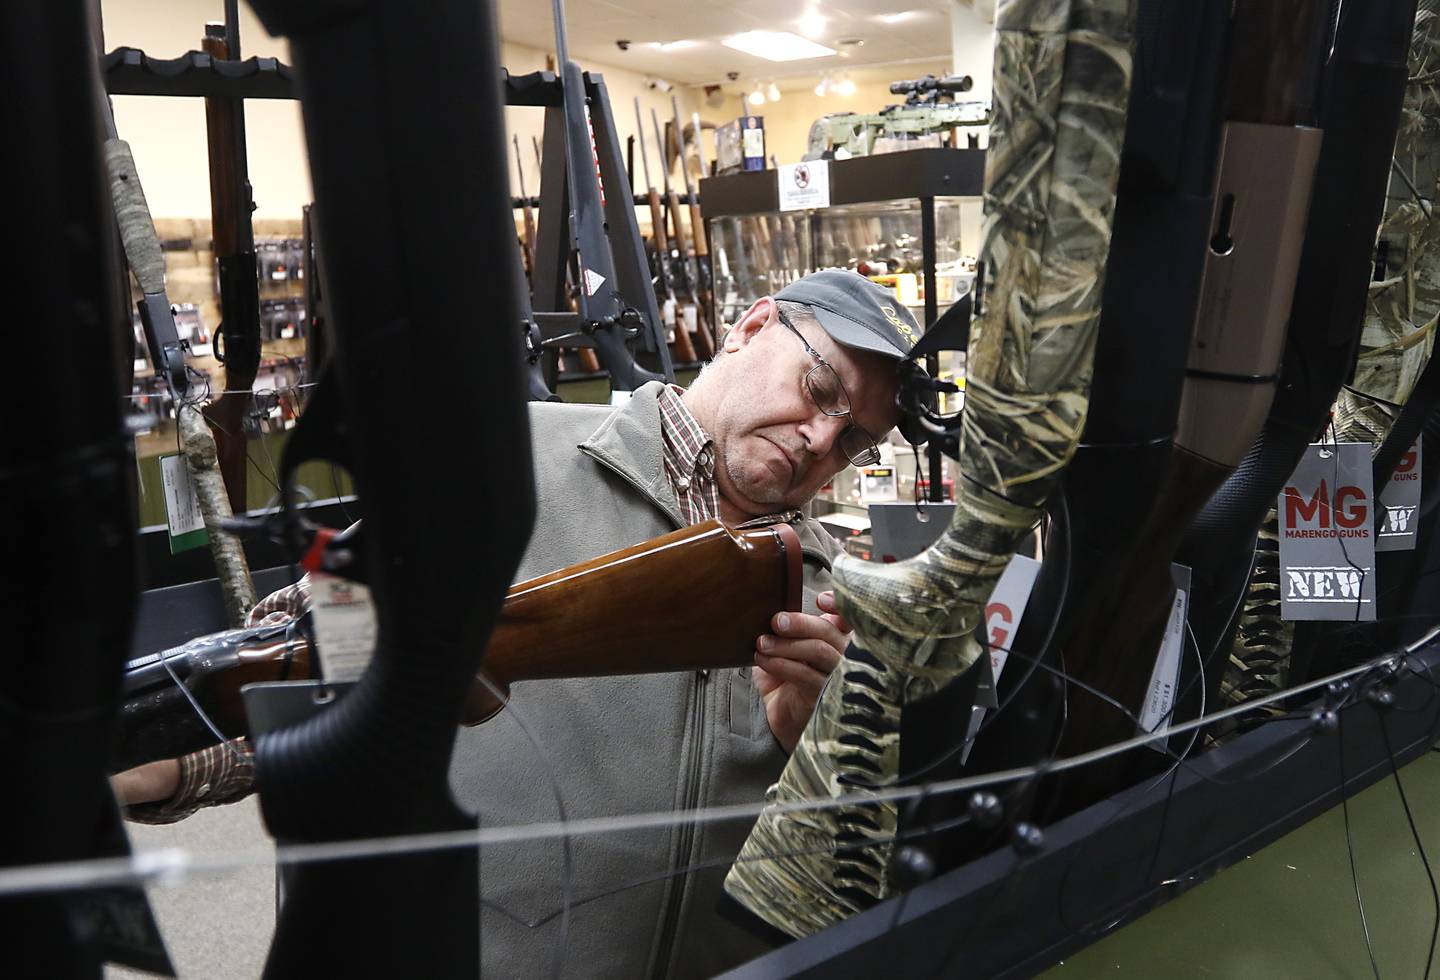 Jeff Norris, of Caledonia, looks at a shotgun Wednesday, Jan. 18, 2023, at Marengo Guns. The McHenry County gun shop is among a group of plaintiffs challenging the constitutionality of Illinois’ ban on semiautomatic weapons and large-capacity magazines that took effect last week.